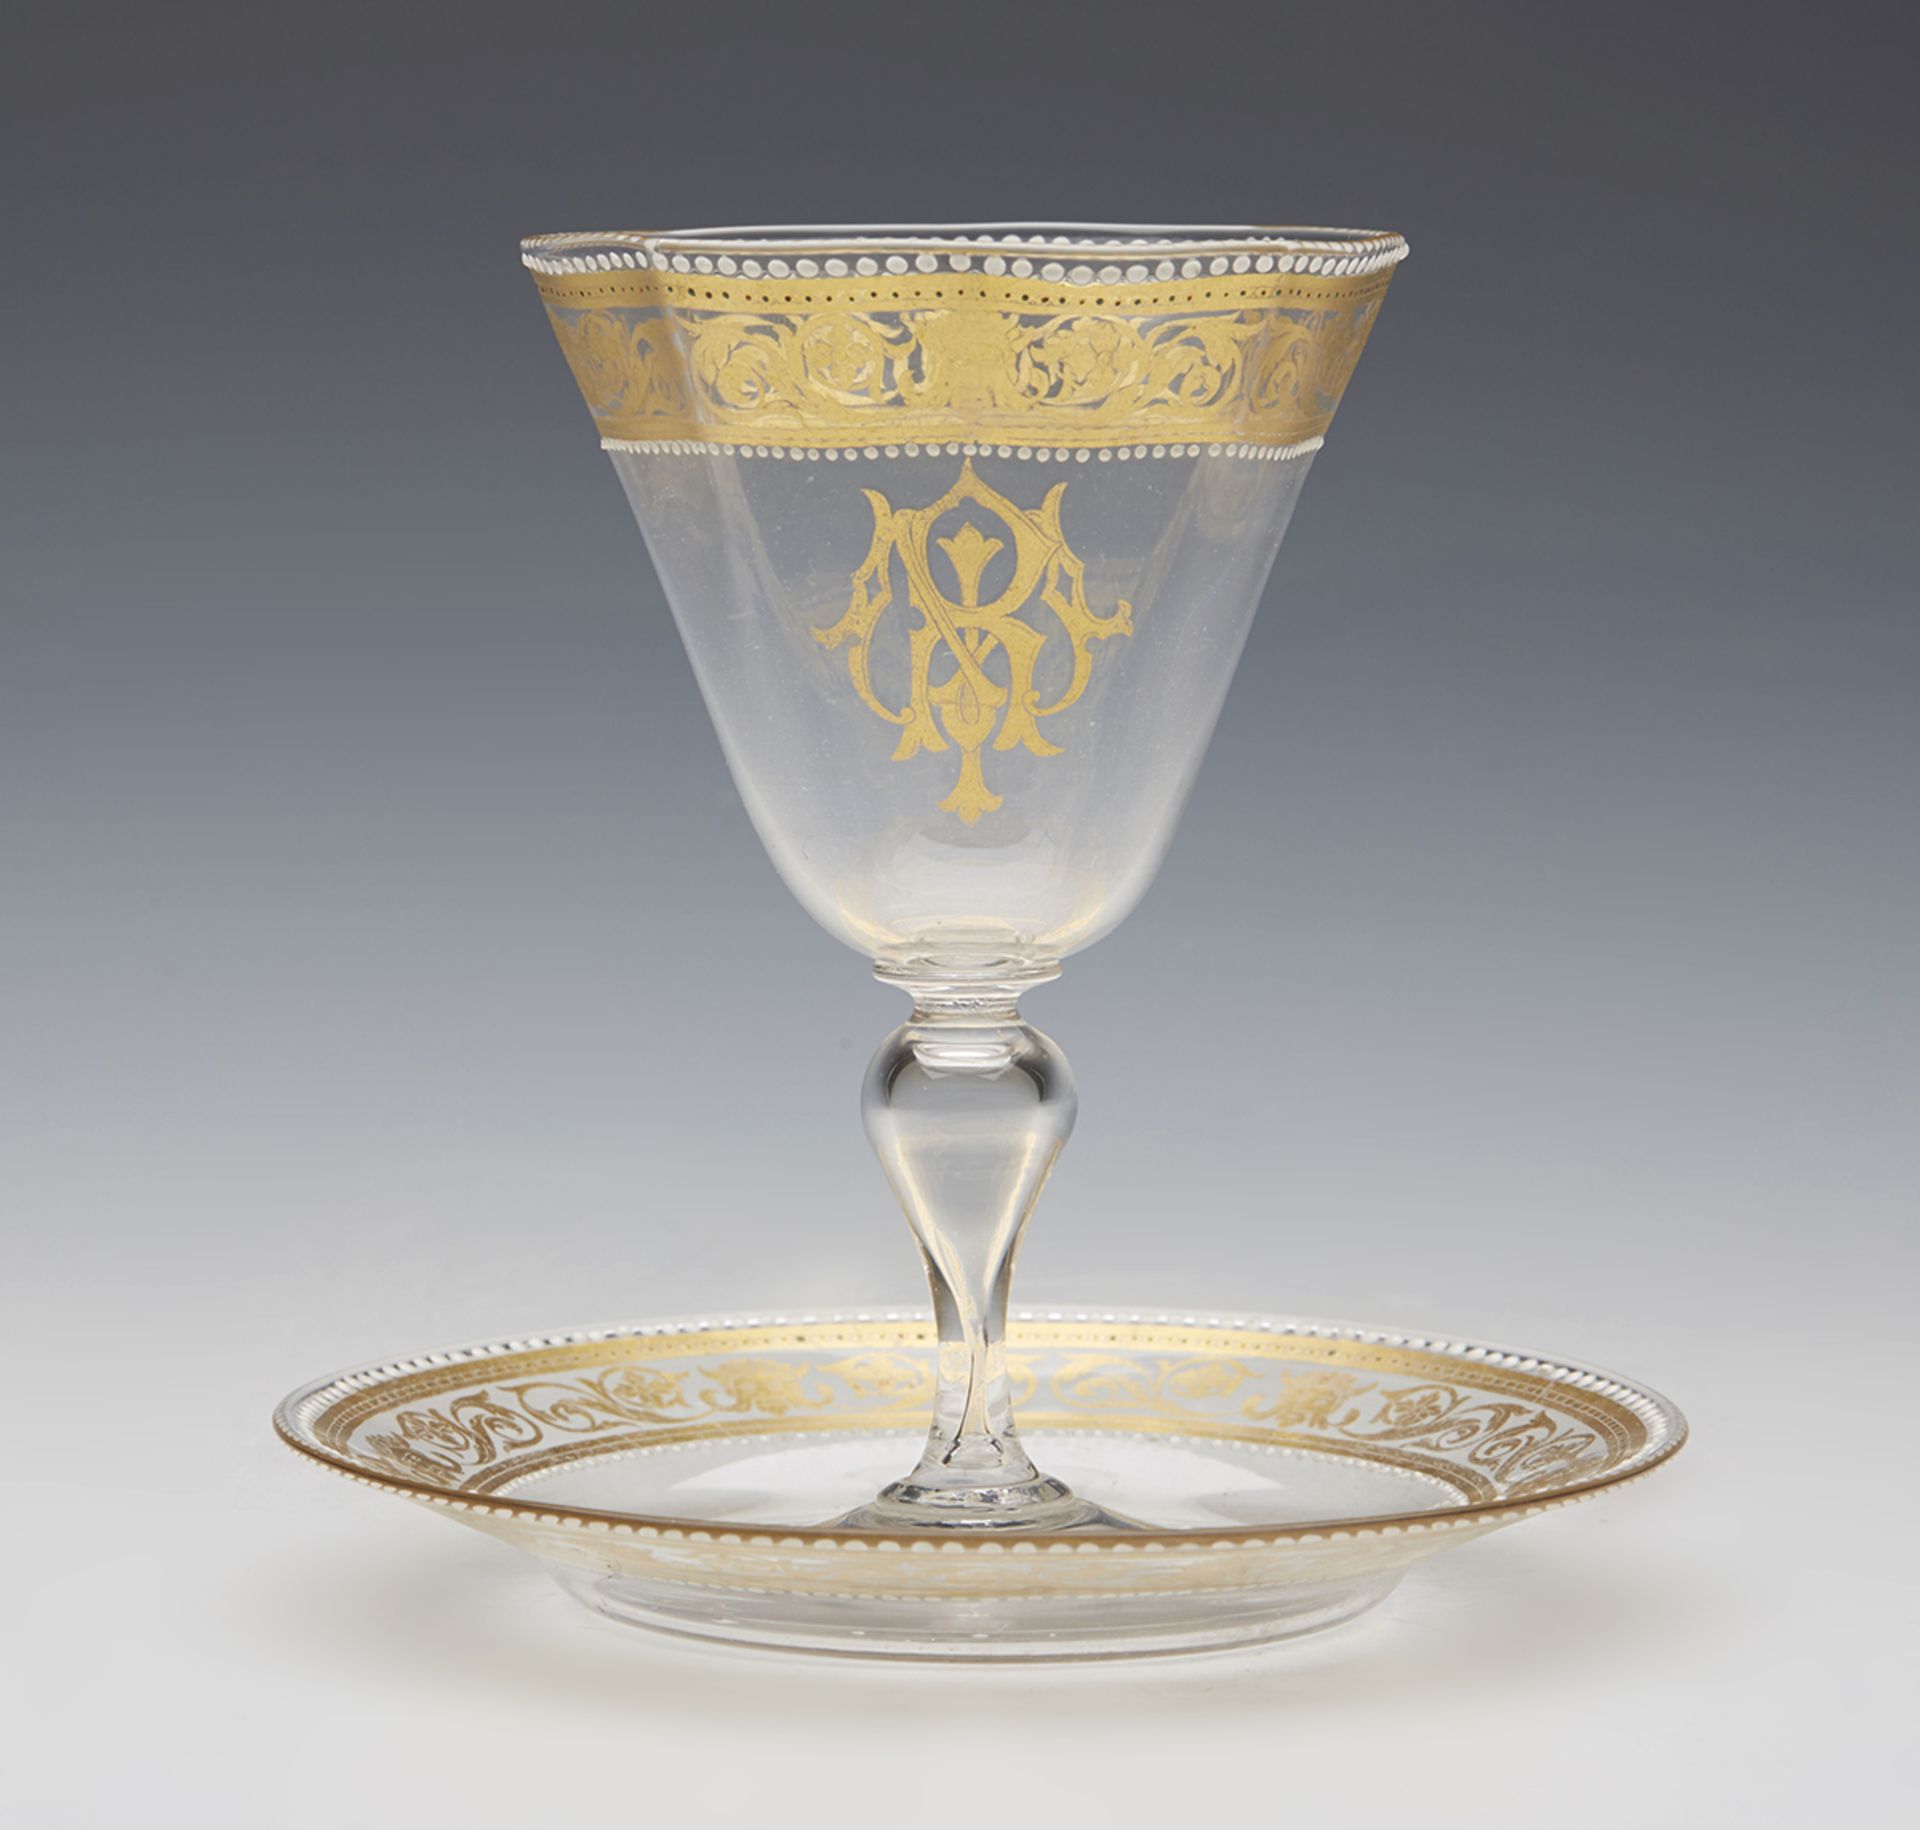 Vintage Venetian Gilded Wine Glass And Stand With Monogram 19/20Th C.